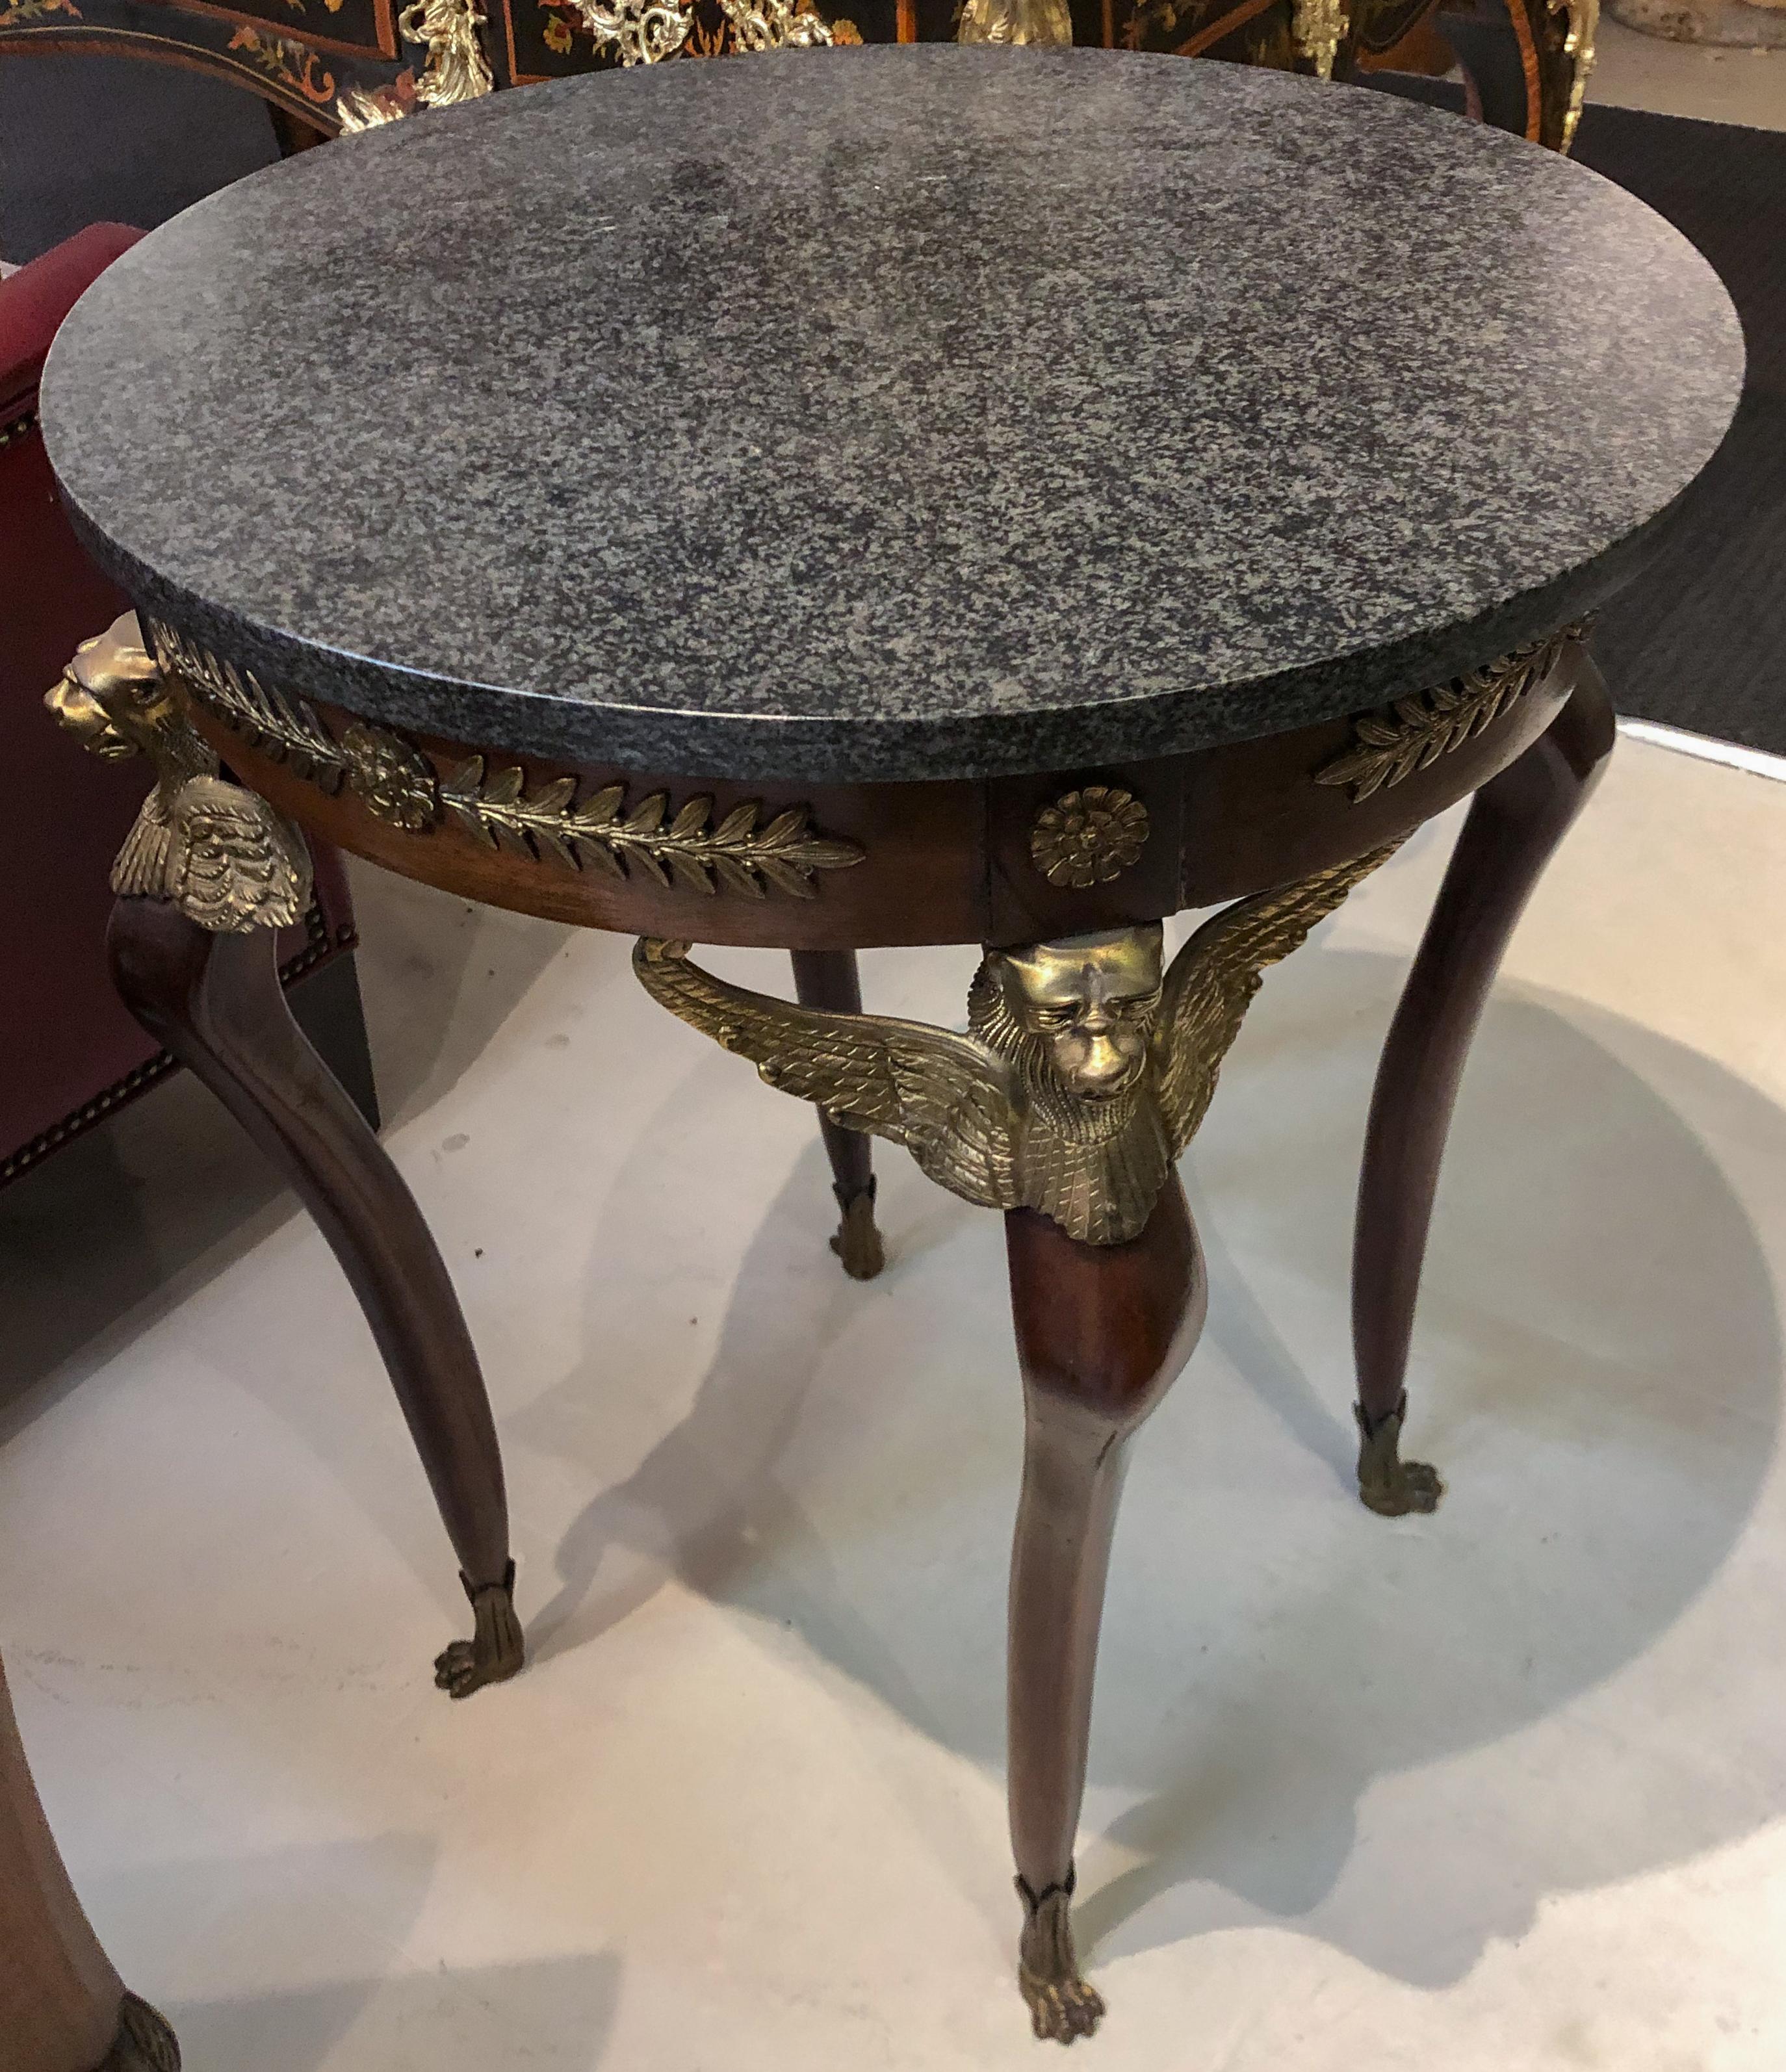 Pair of Imperial Empire style side or center tables with marble top and gilt griffin details.